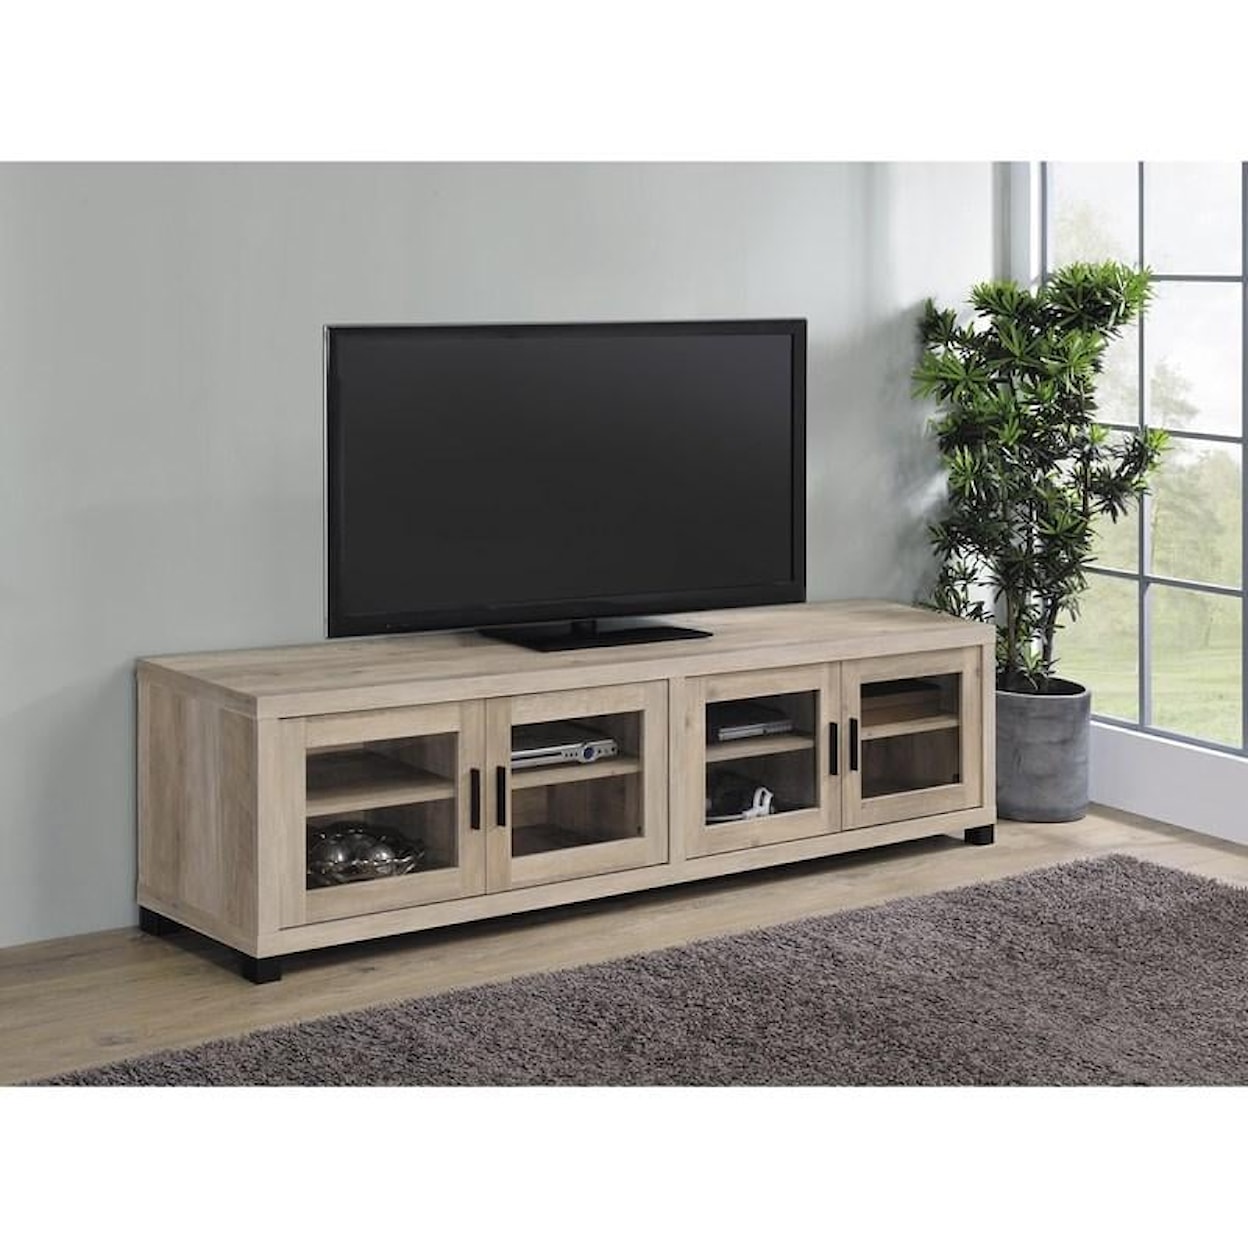 Coaster TV Stand 80" NATURAL PINE TV STAND |